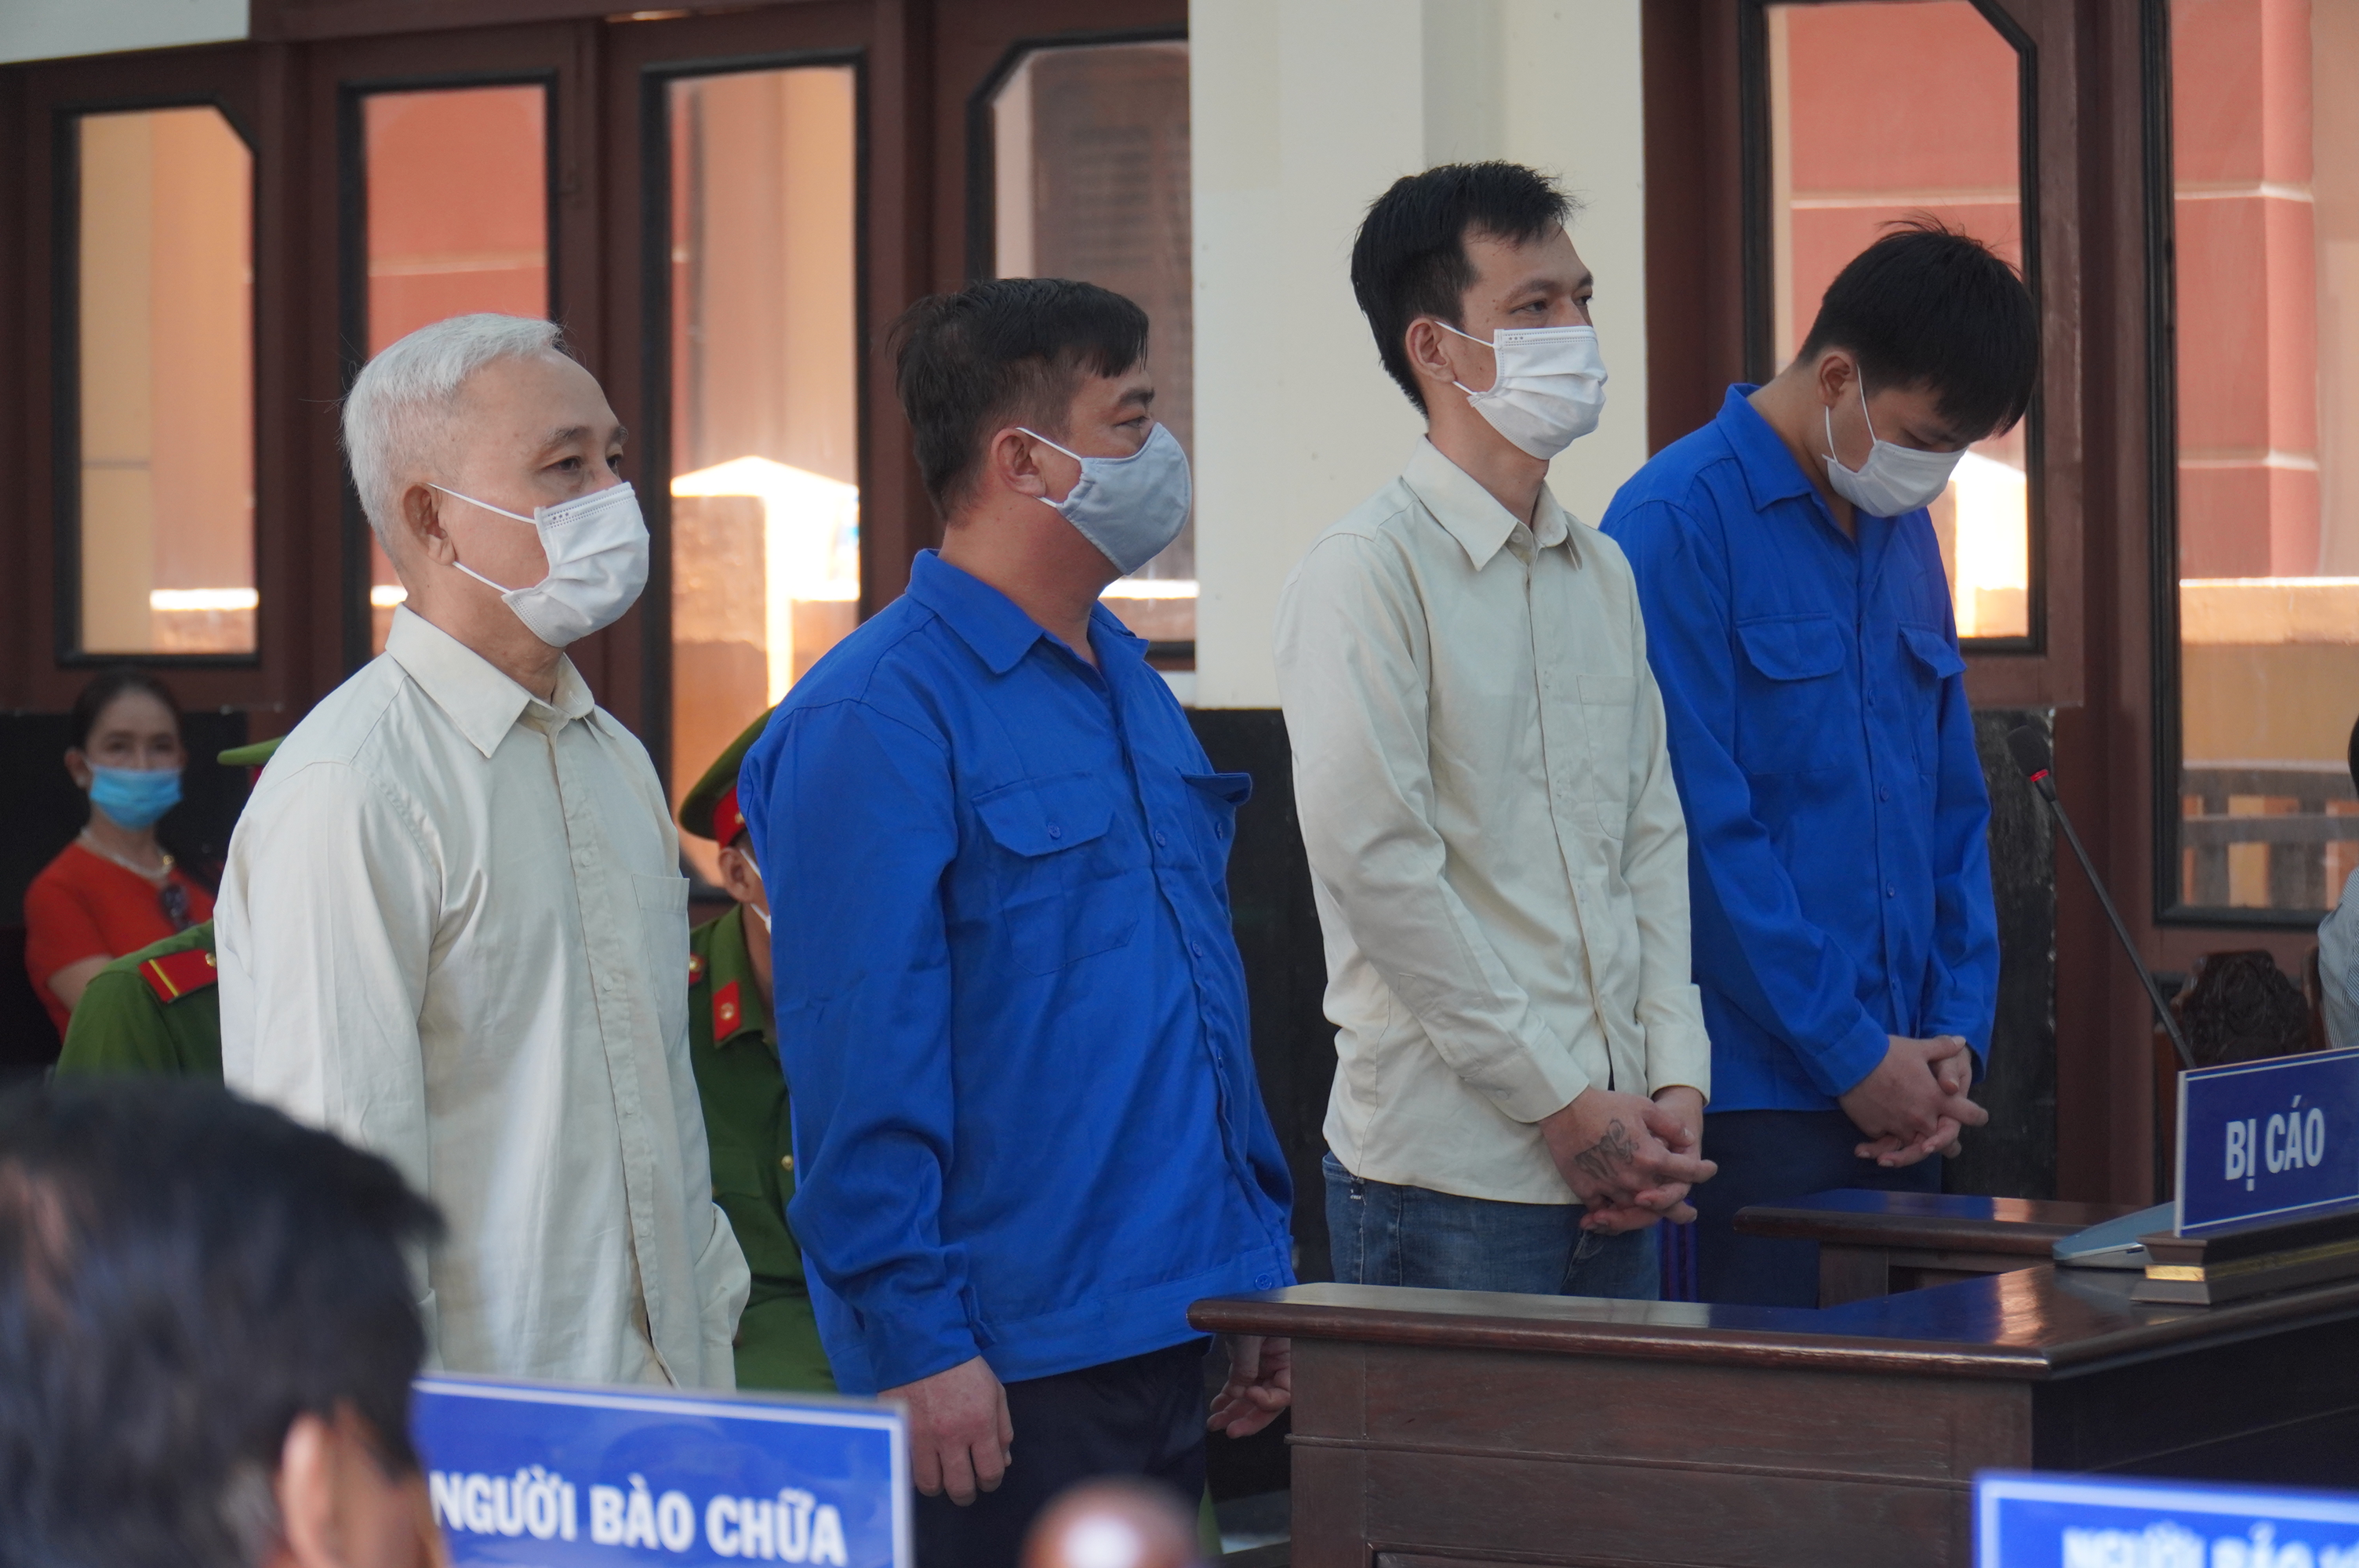 Vietnamese former hospital director gets 18 years in prison for murder